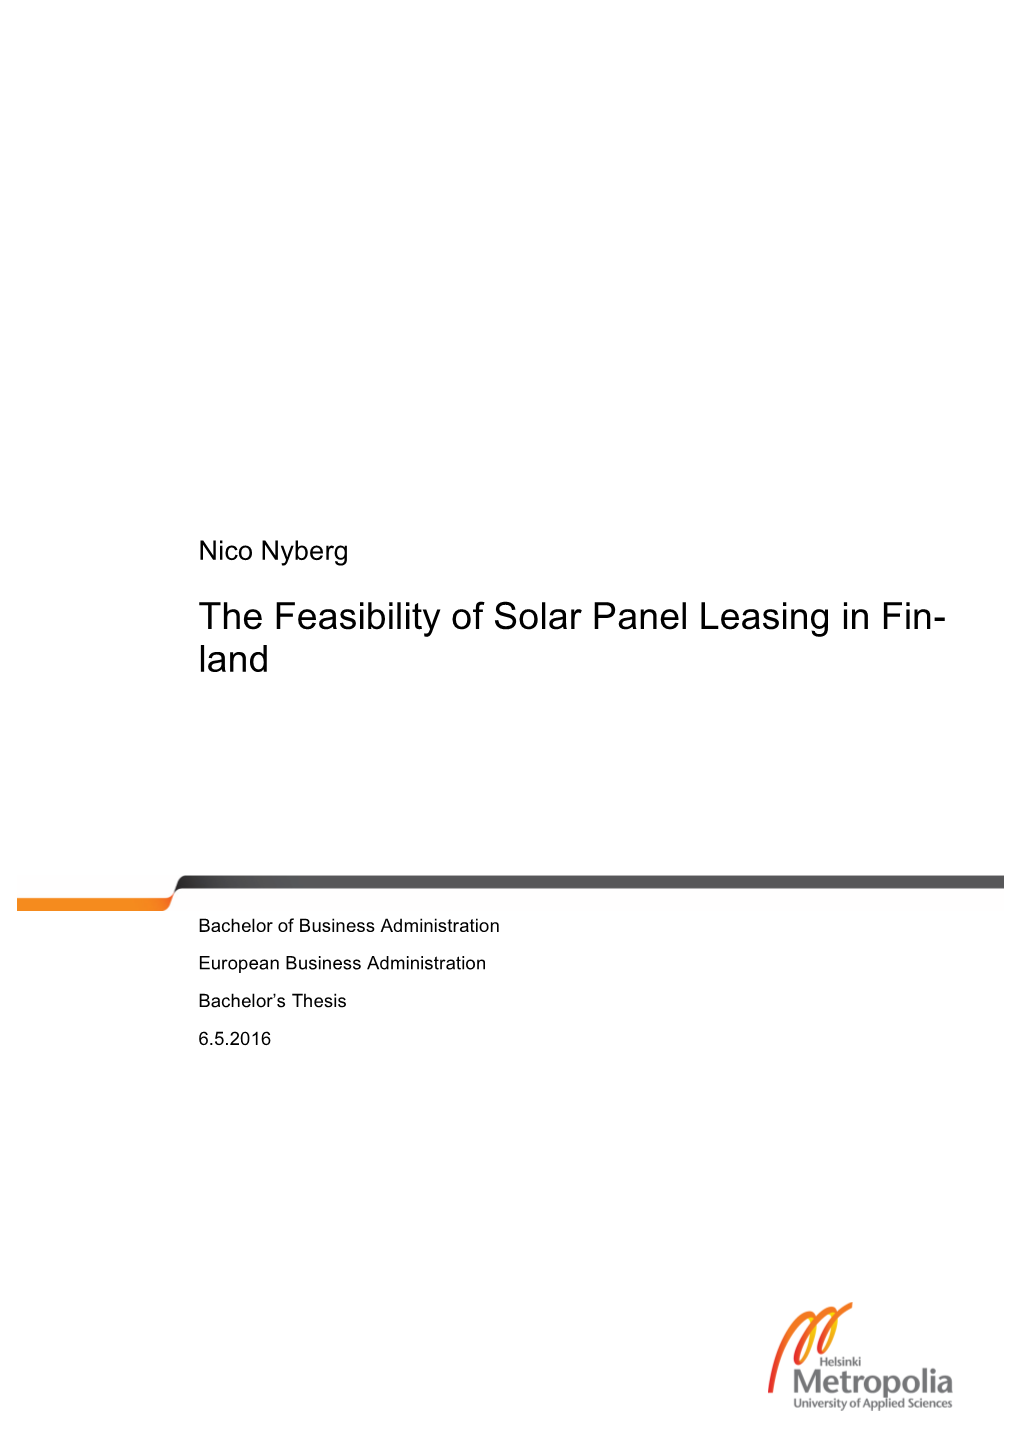 The Feasibility of Solar Panel Leasing in Fin- Land